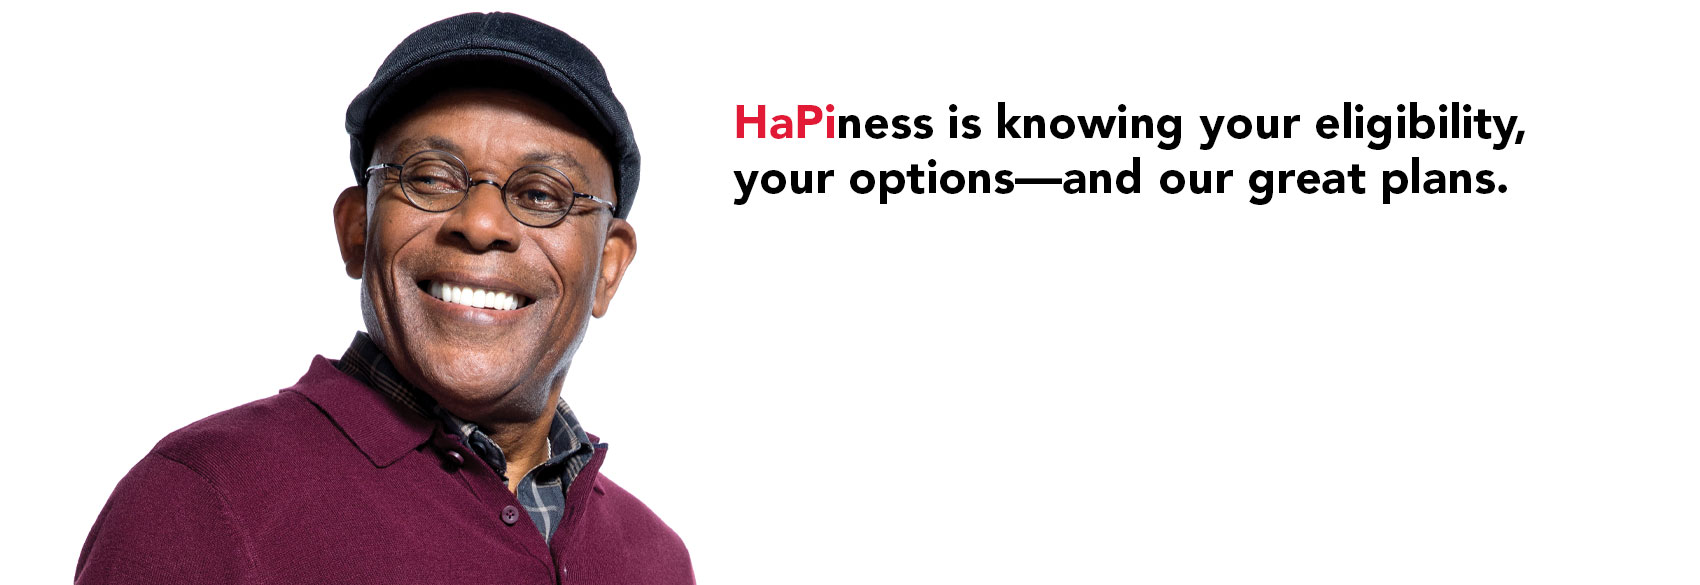 HaPiness is knowing your eligibility, your options-and our great plans